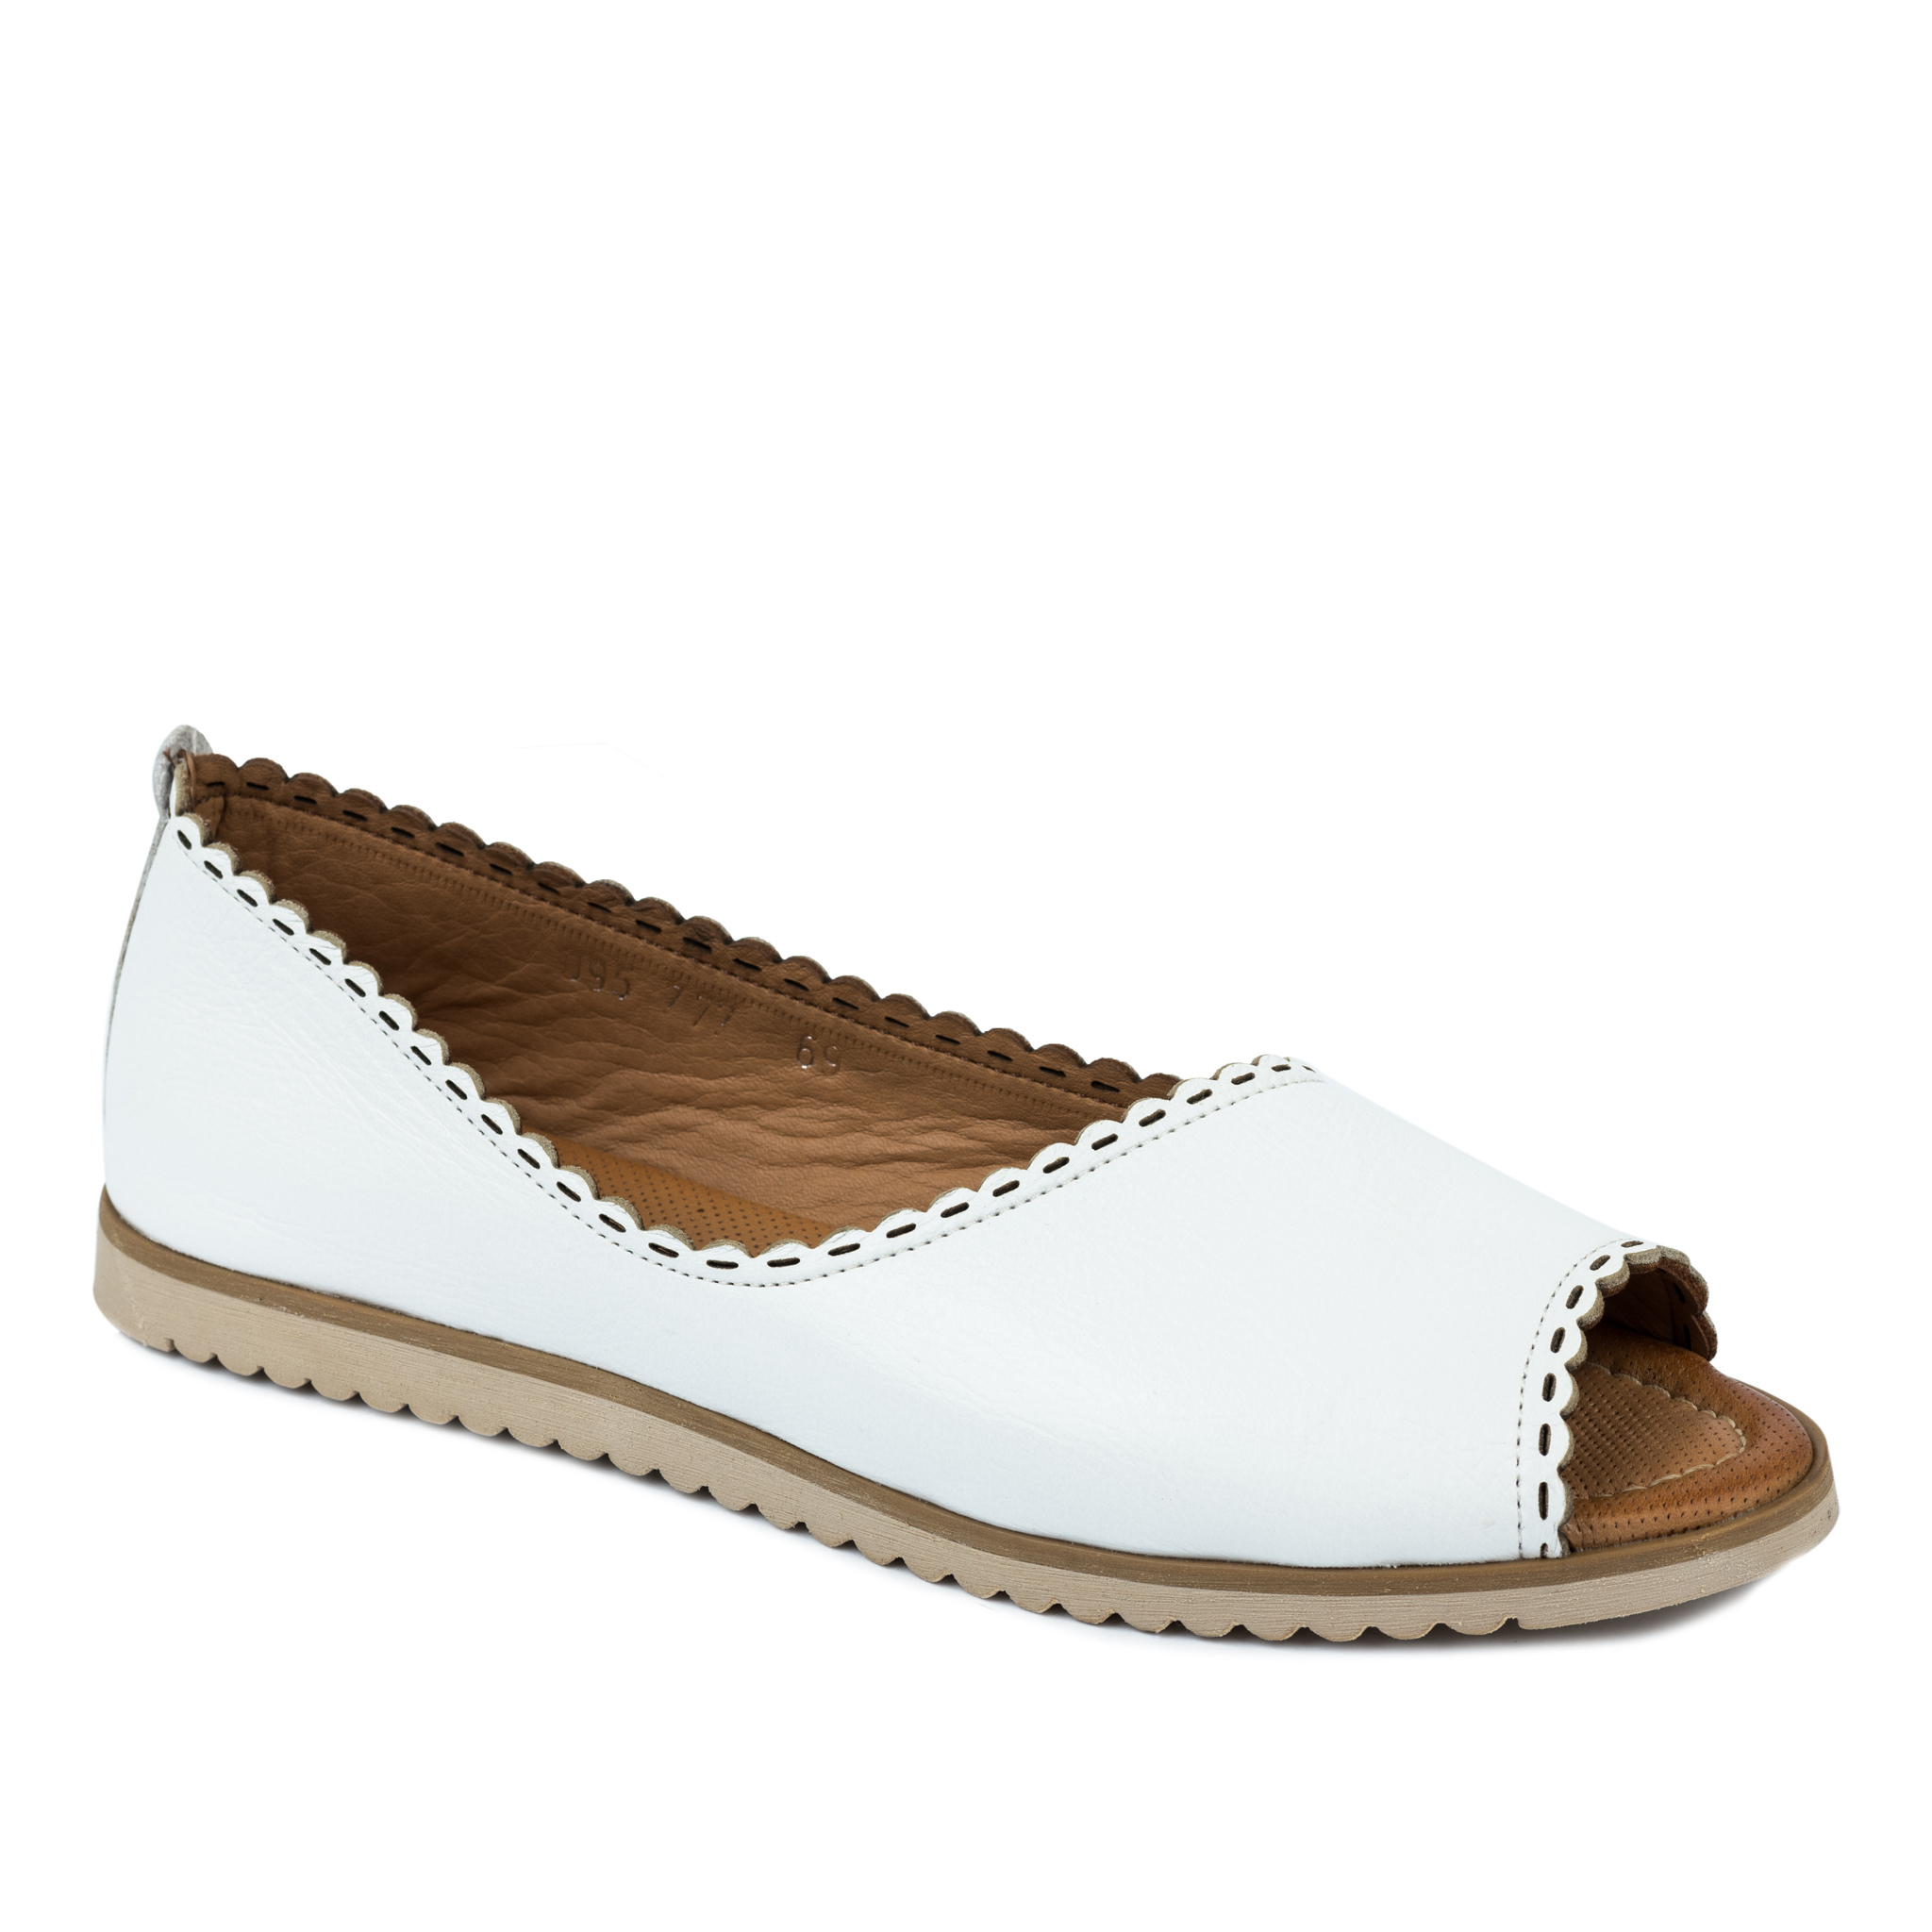 Leather sandals A680 - WHITE